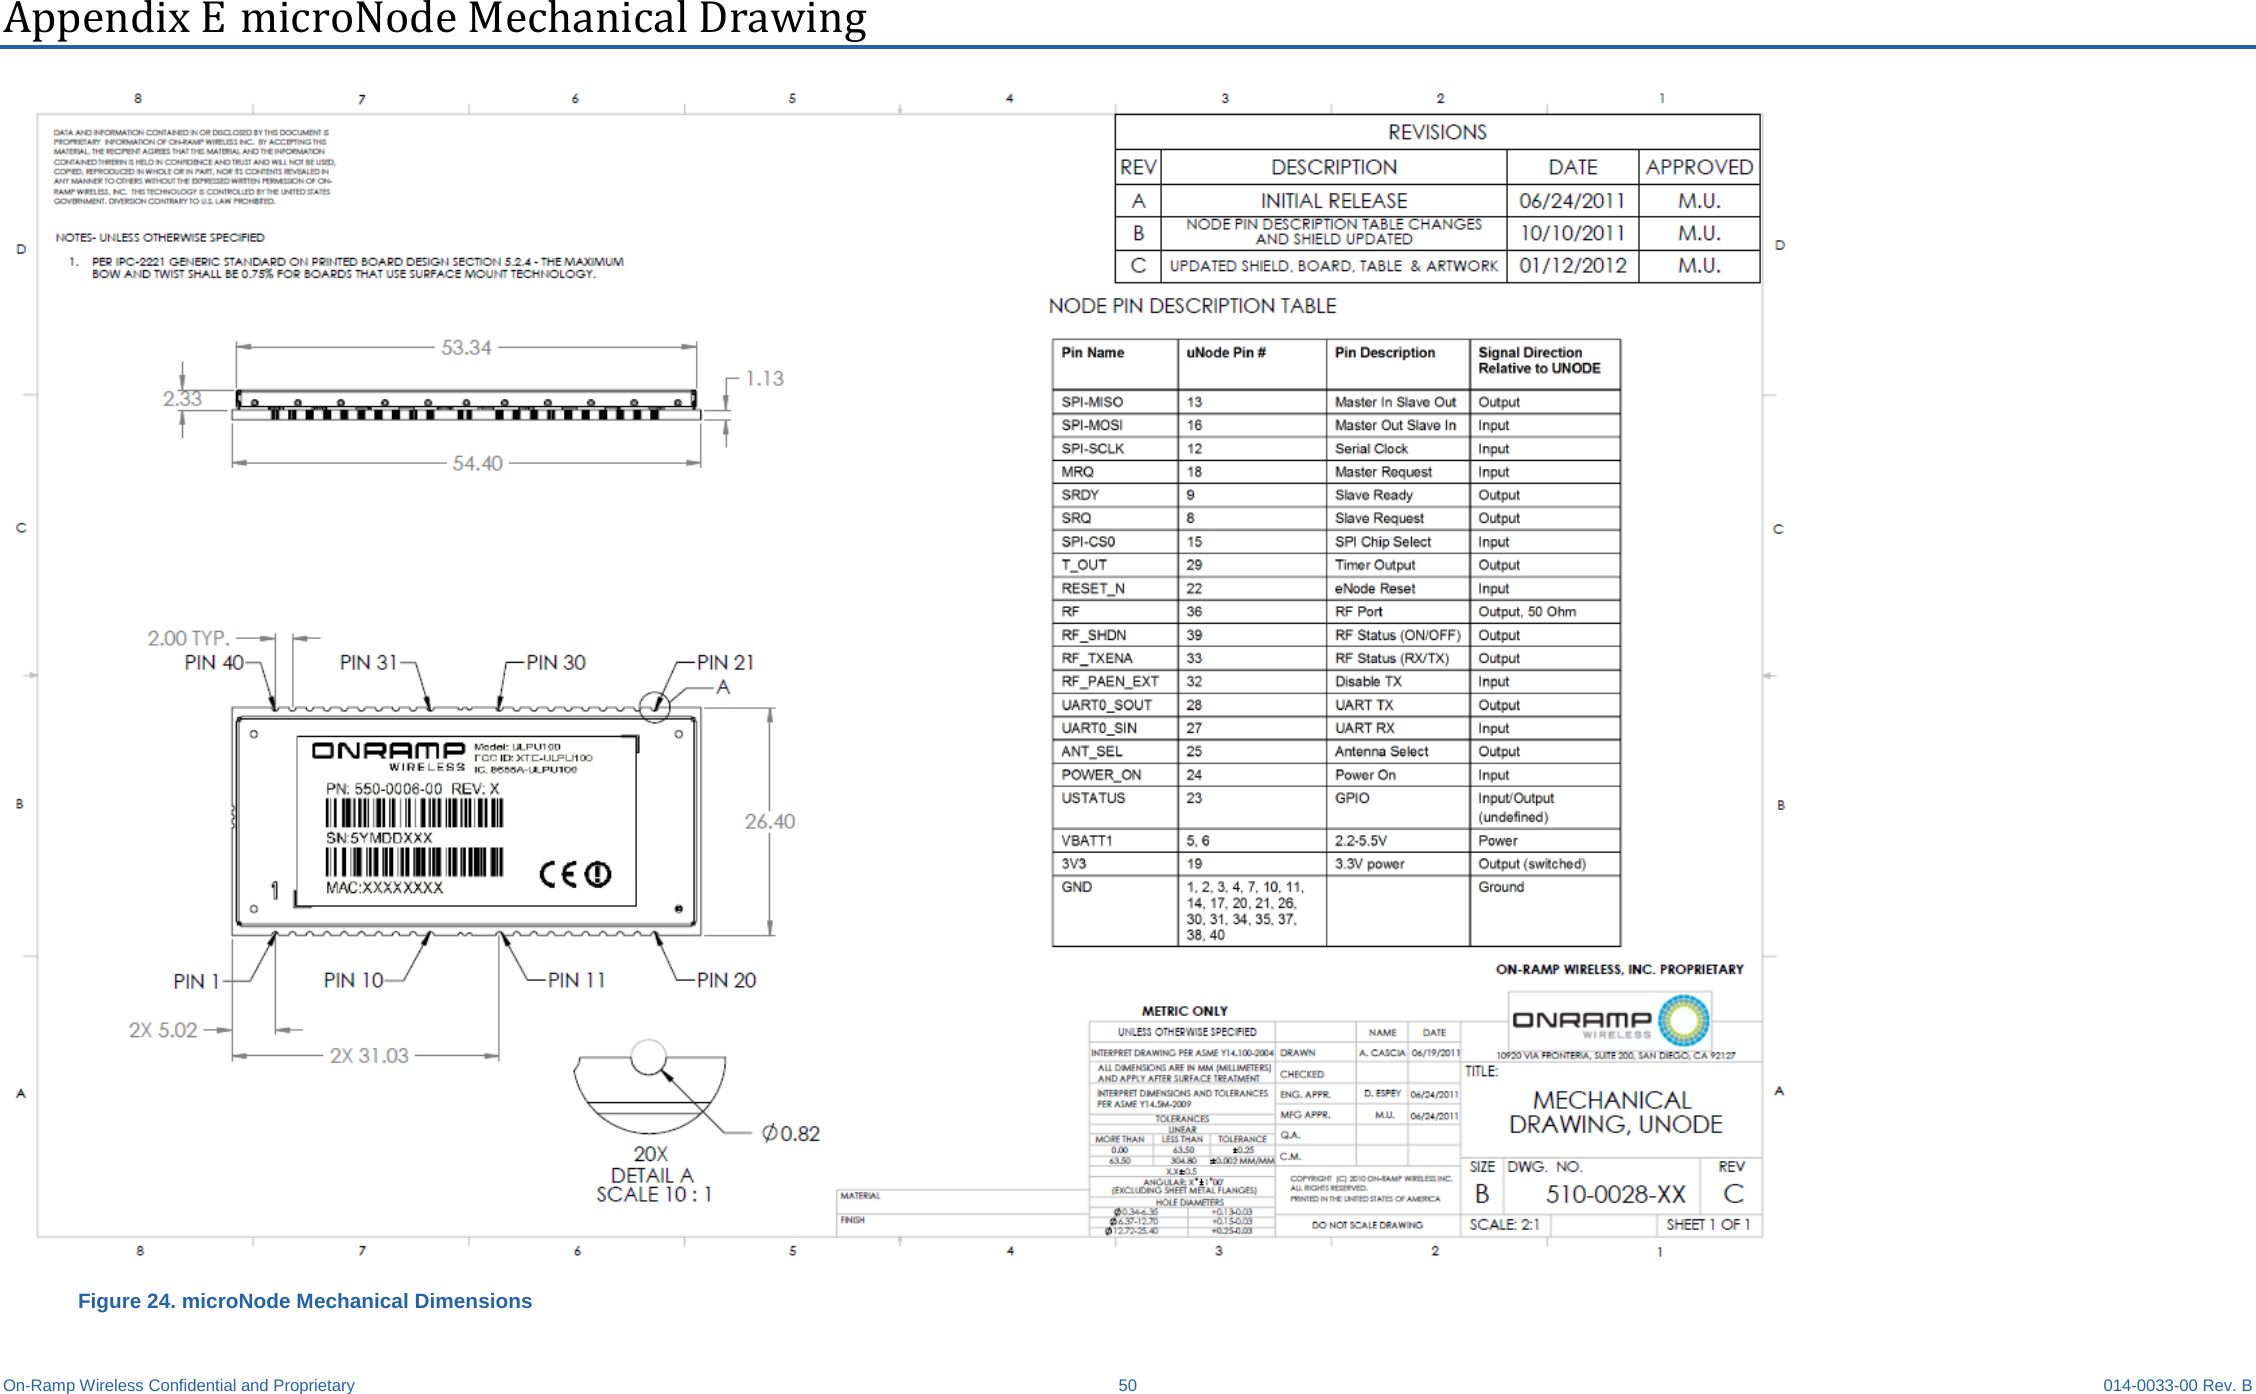  On-Ramp Wireless Confidential and Proprietary 50 014-0033-00 Rev. B Appendix E microNode Mechanical Drawing  Figure 24. microNode Mechanical Dimensions 